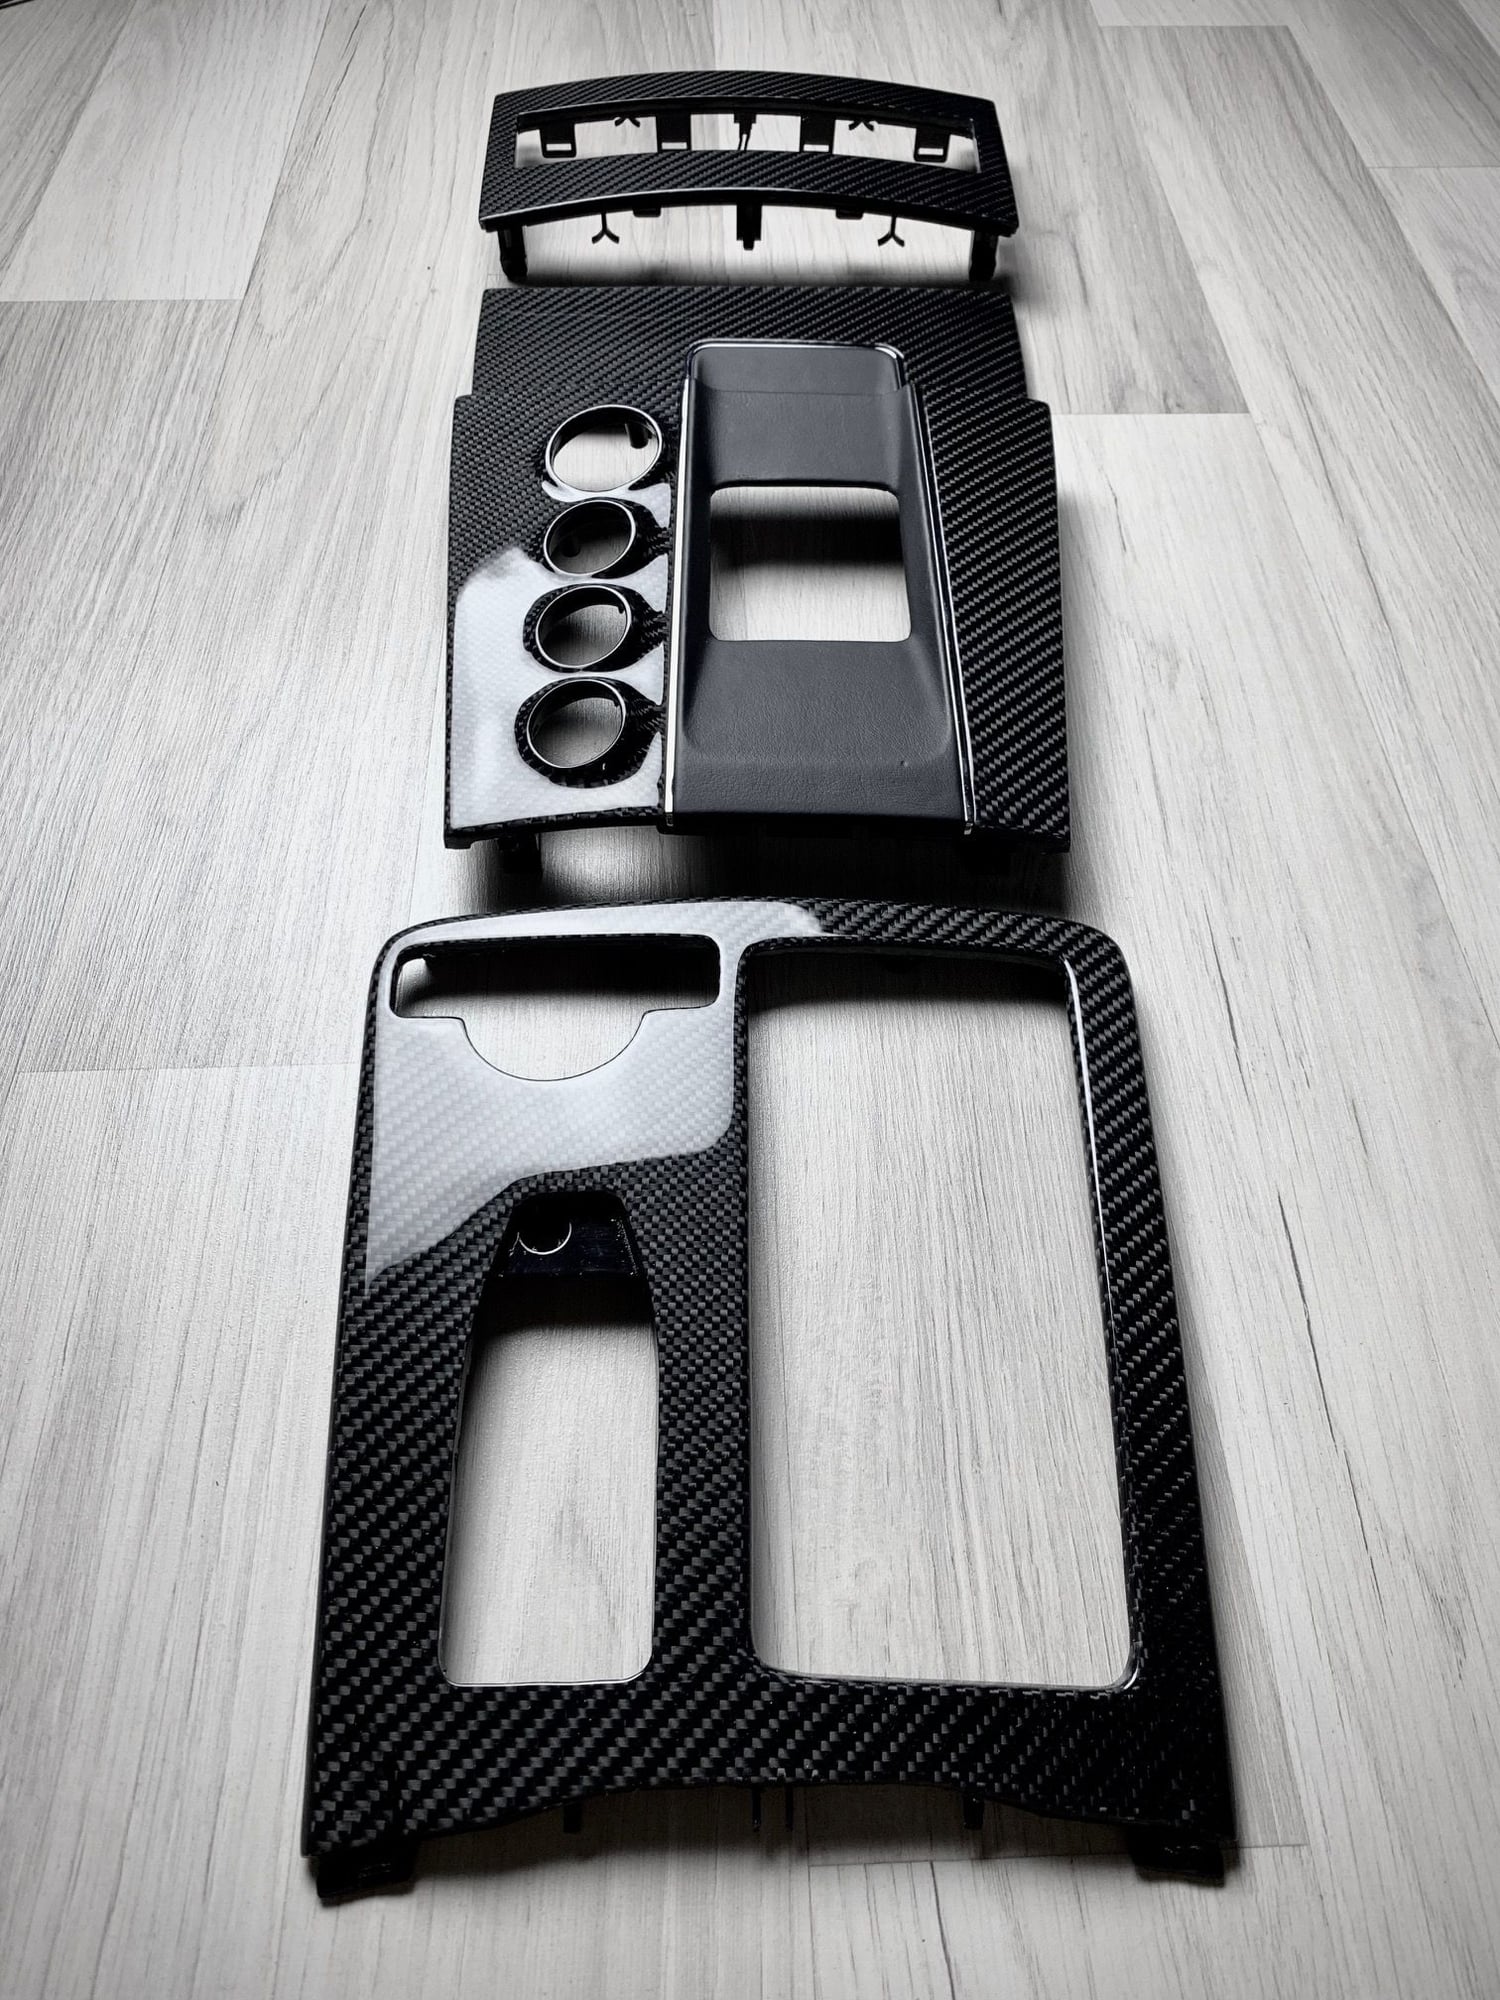 Interior/Upholstery - FS: 2010+ E63 W212 Carbon Lower Interior Trims + Carbon Cupholder trim - New - 2010 to 2016 Mercedes-Benz E63 AMG - 2010 to 2016 Mercedes-Benz E63 AMG S - Kolobrzeg, Poland